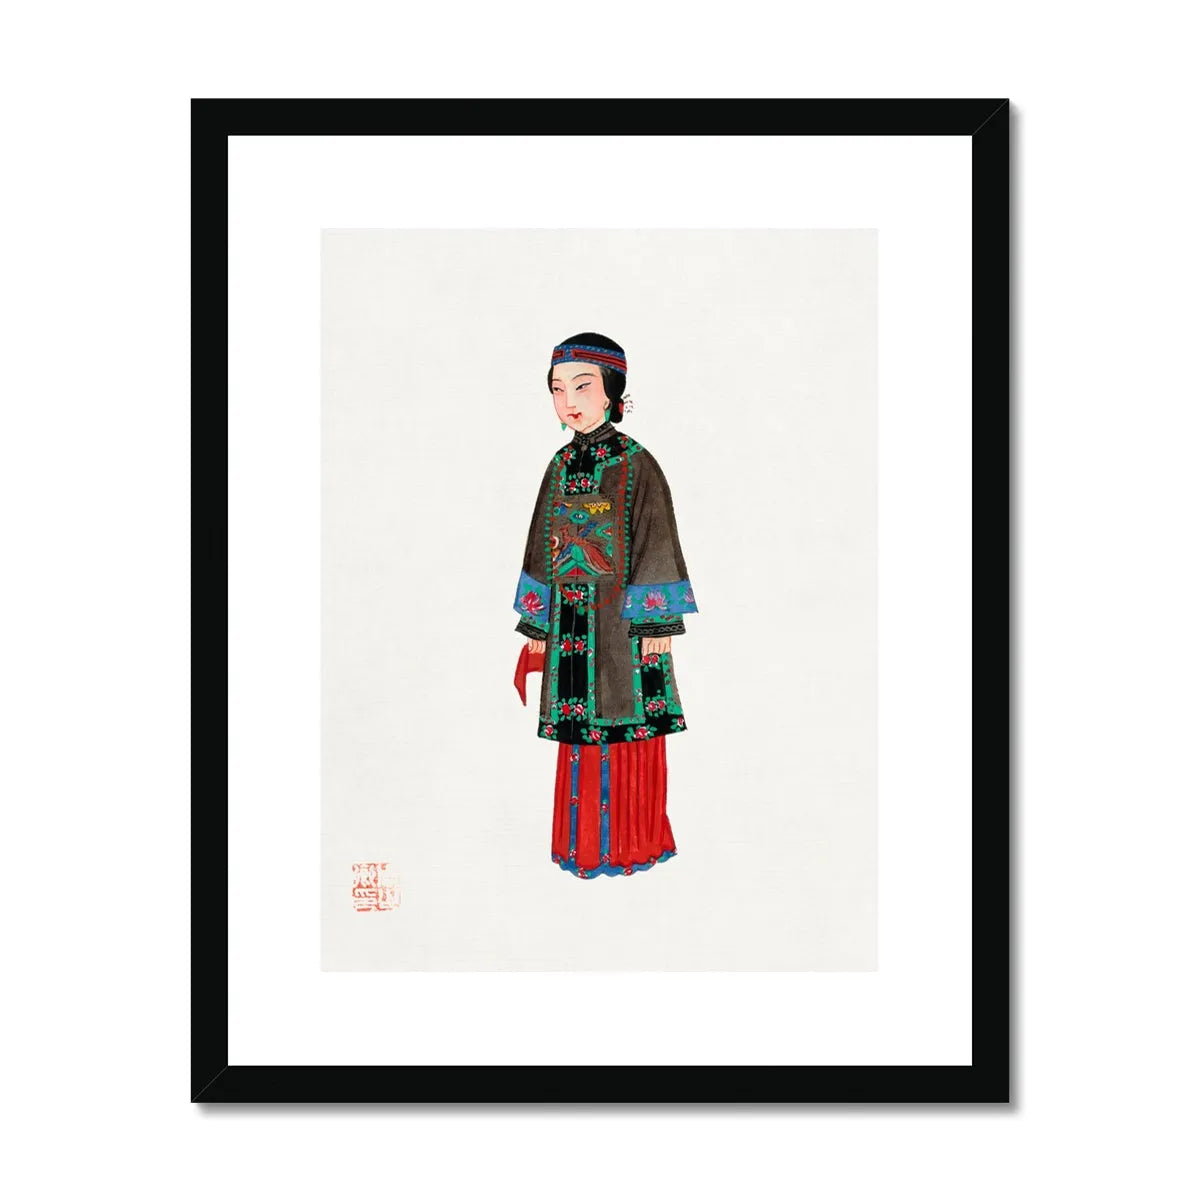 Chinese Noblewoman At Court Framed & Mounted Print - 16’x20’ / Black Frame - Posters Prints & Visual Artwork